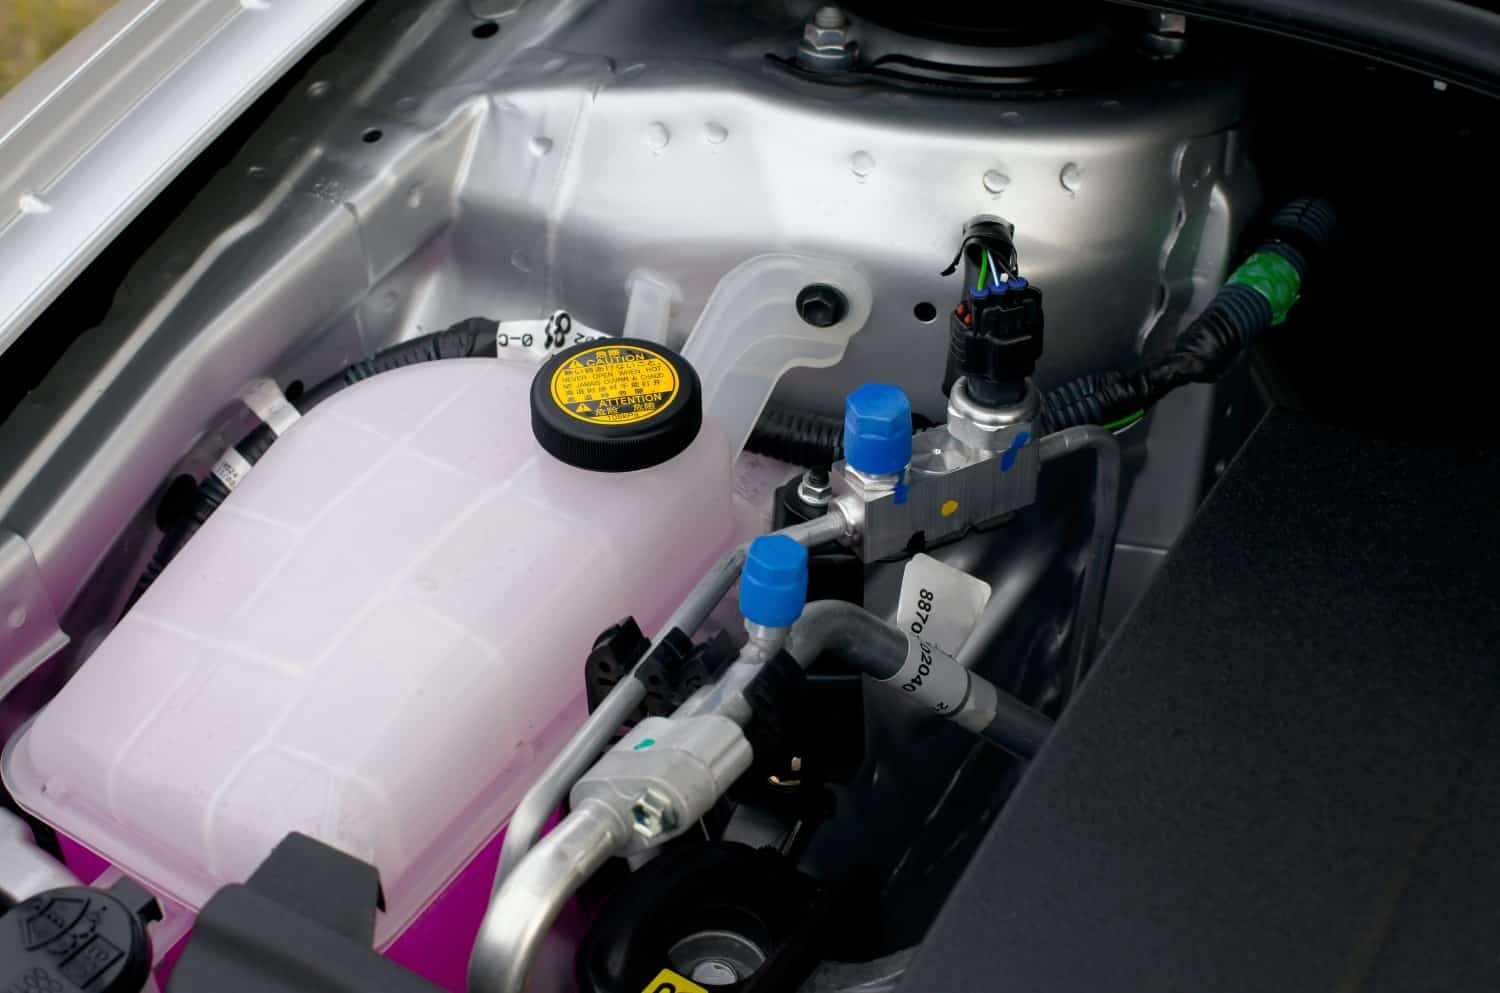 stock-photo-coolant-container-in-a-car-s-engine-bay-131891621